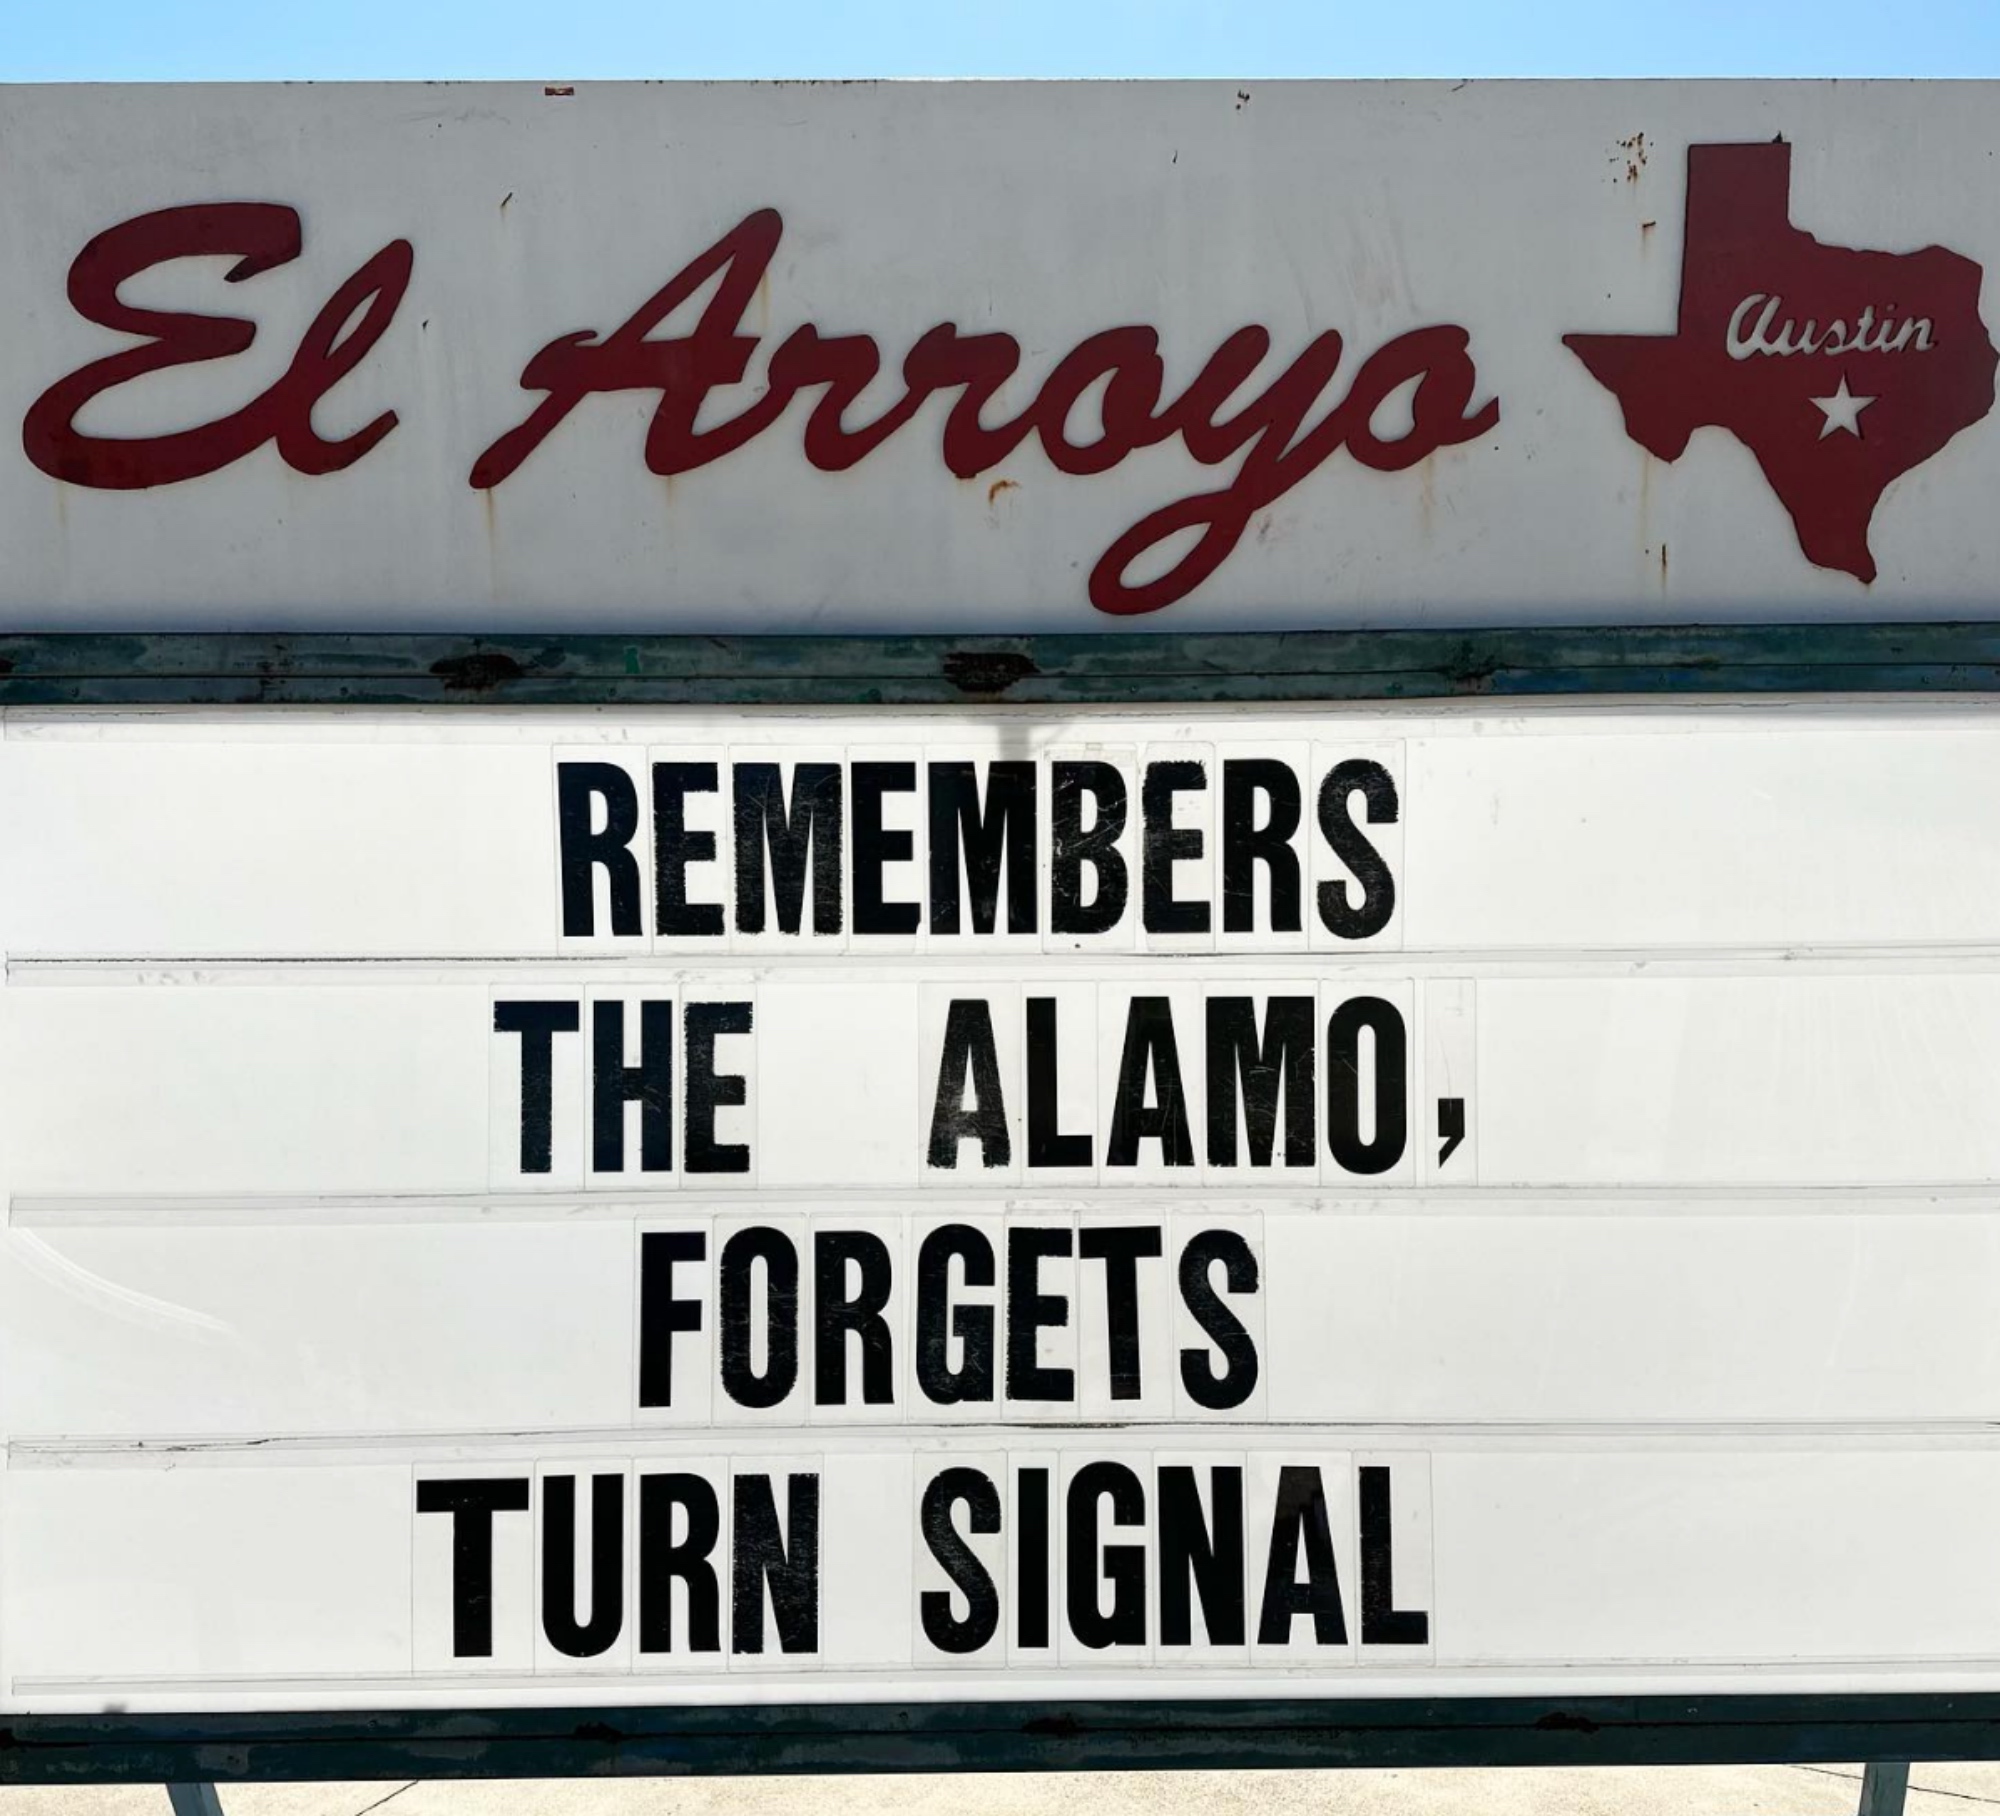 funny meme about The Alamo and driving